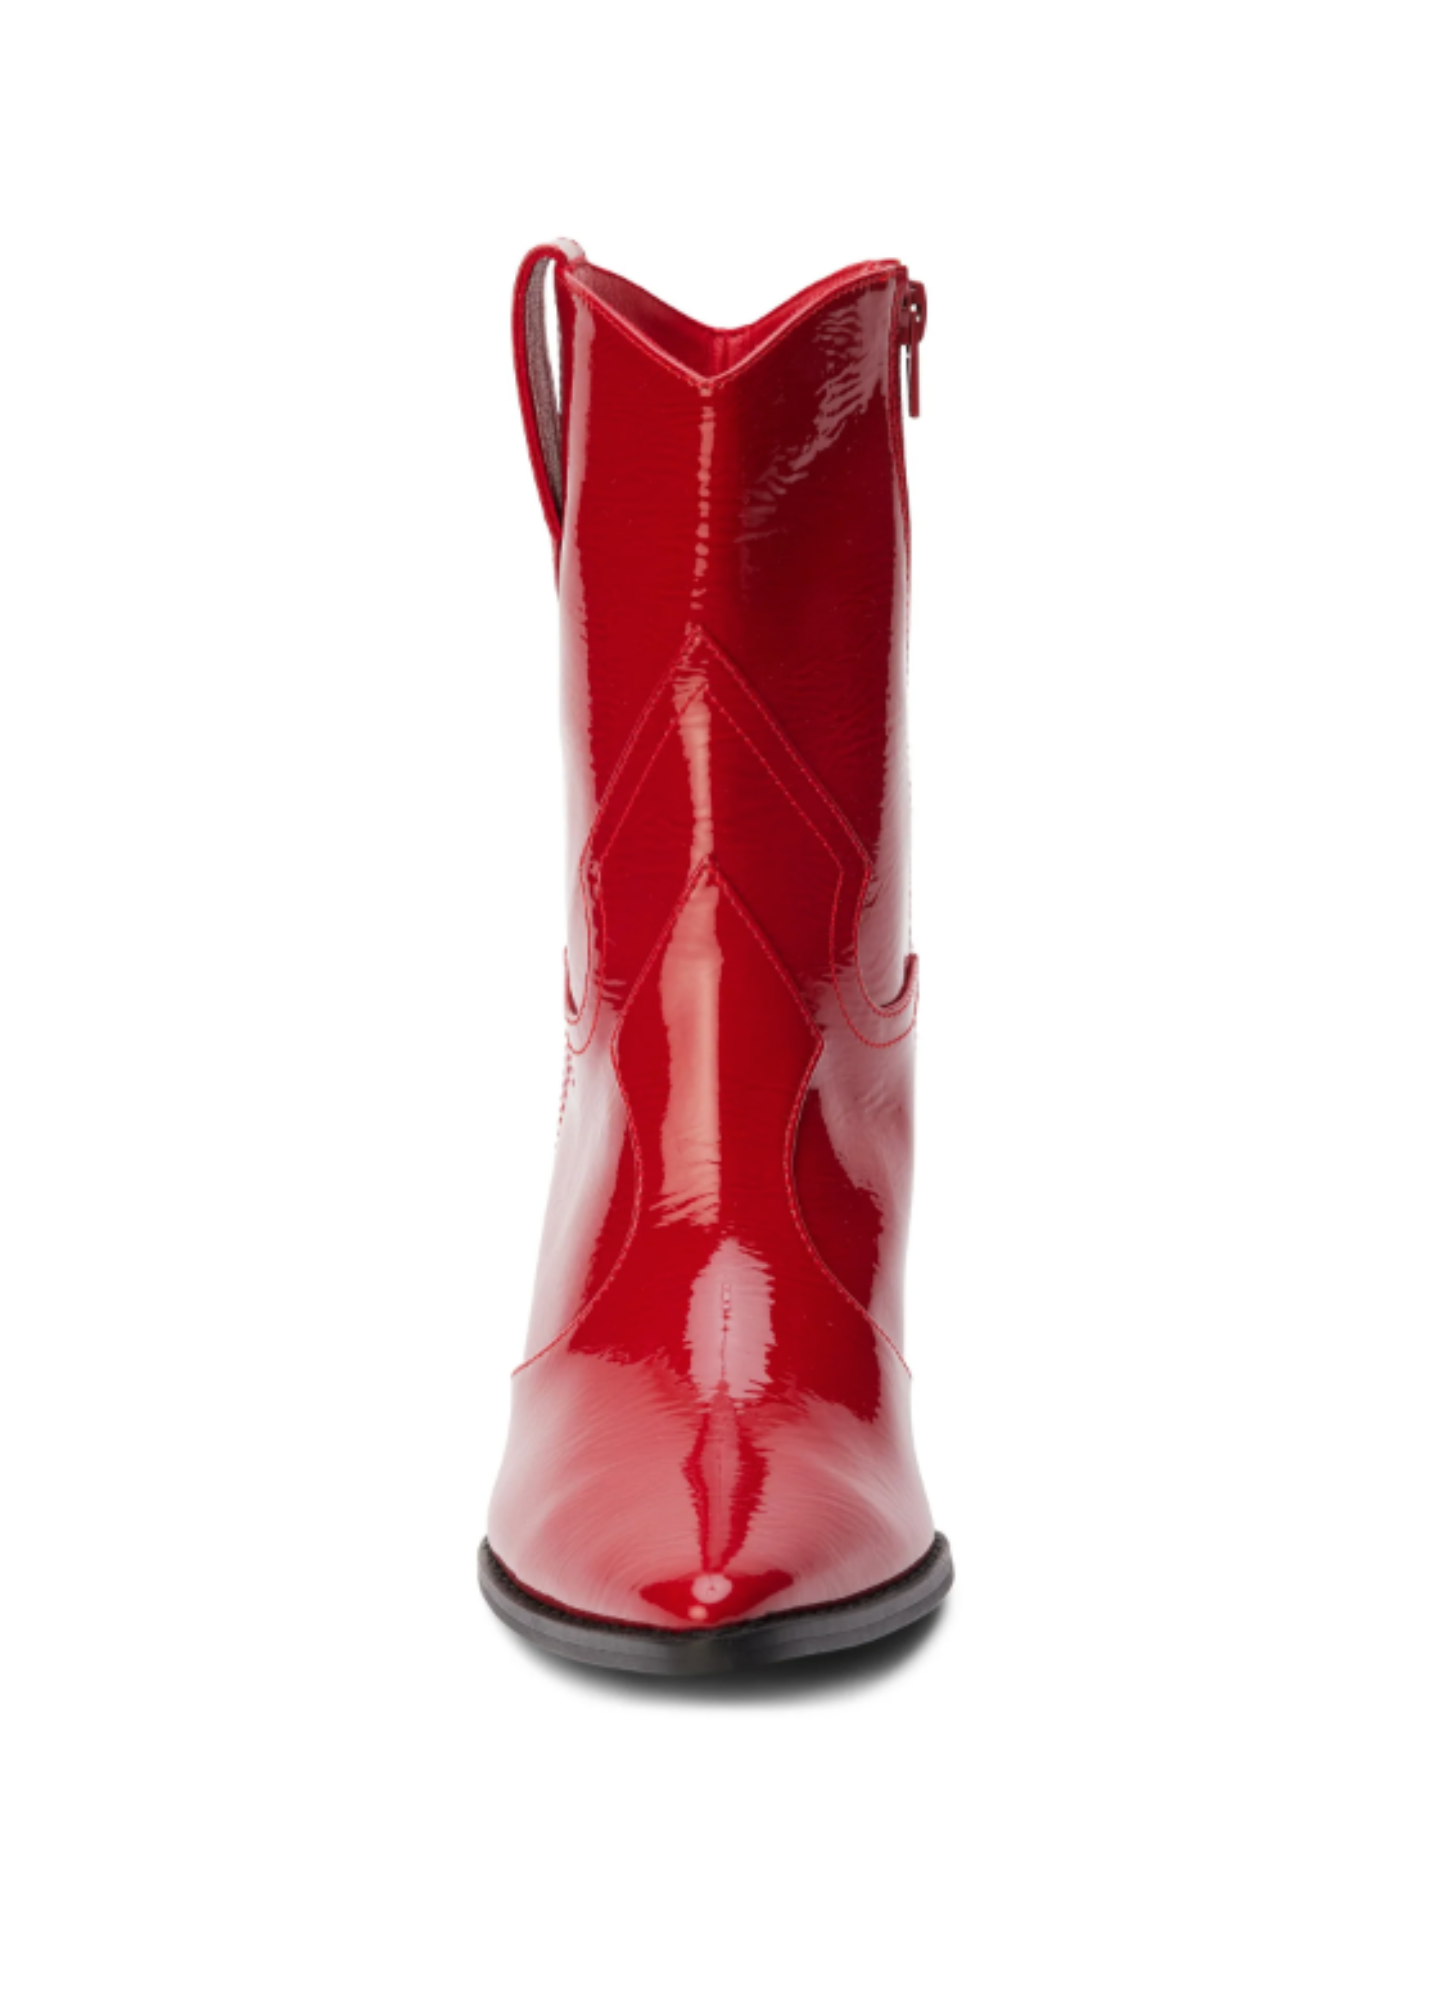 Bambi Ankle Boot in Red Patent